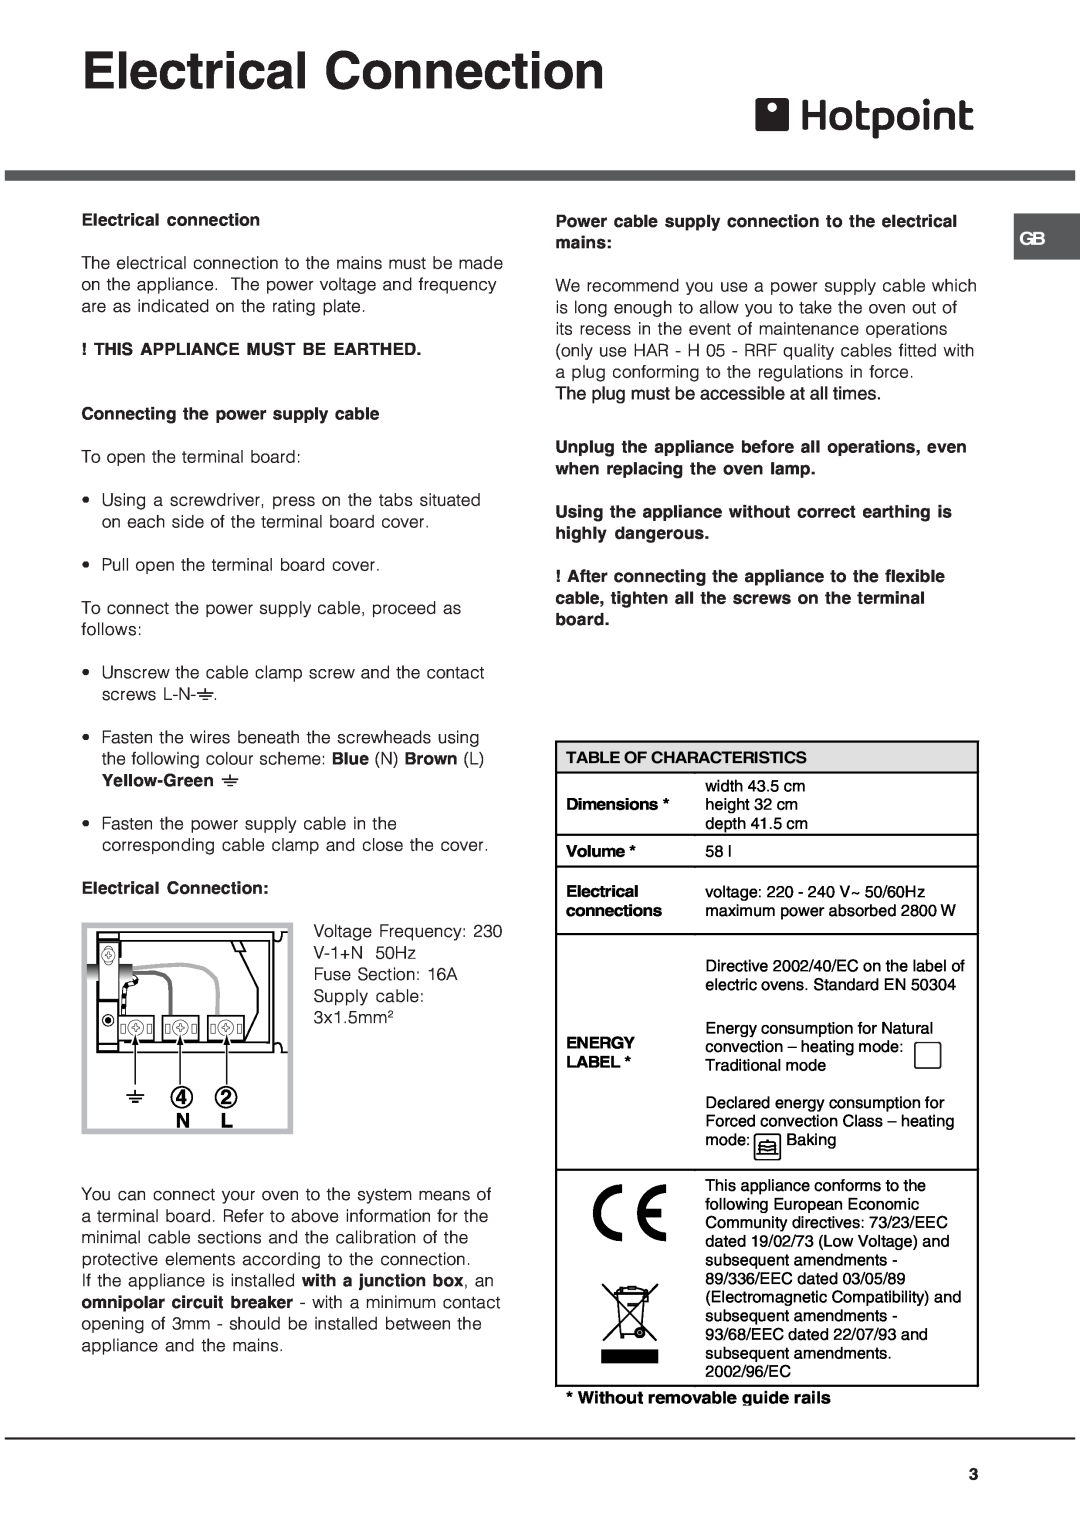 Hotpoint SQ892I manual Electrical Connection, 4 2 N L, The plug must be accessible at all times 